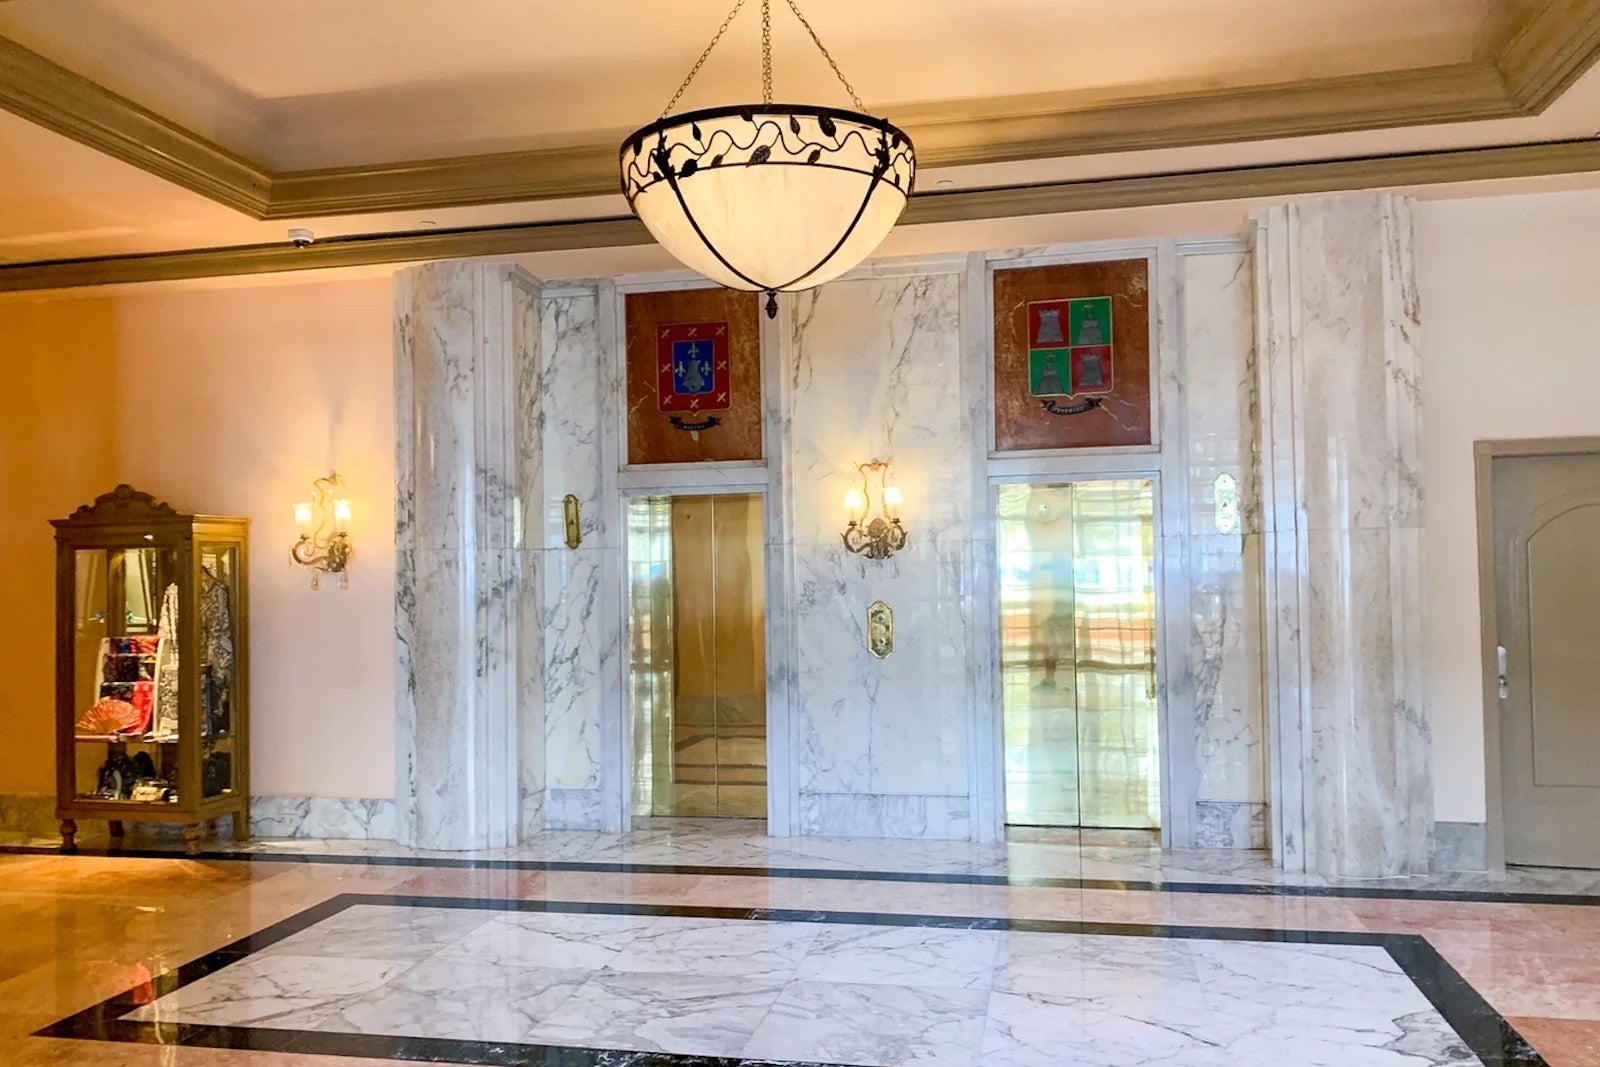 Hotel lobby with golden elevators